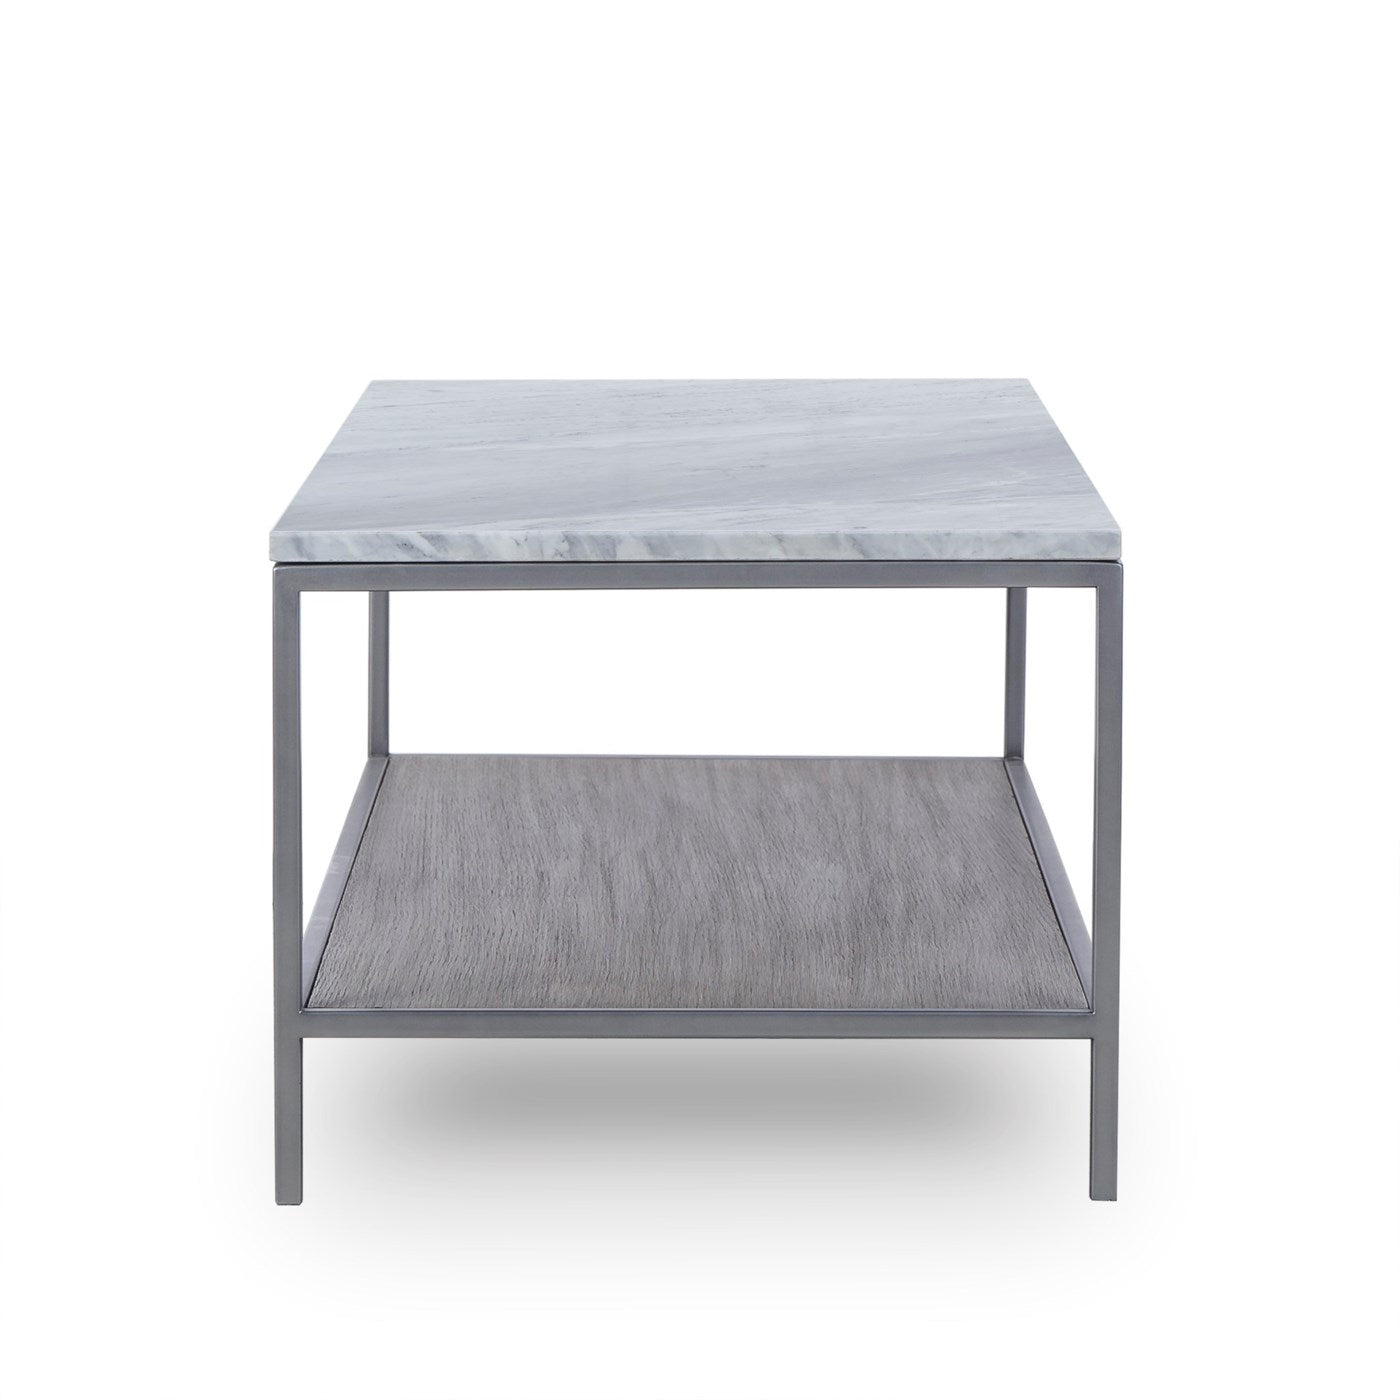 Maison 55 Paxton Coffee Table Rectangle Hyfair Living